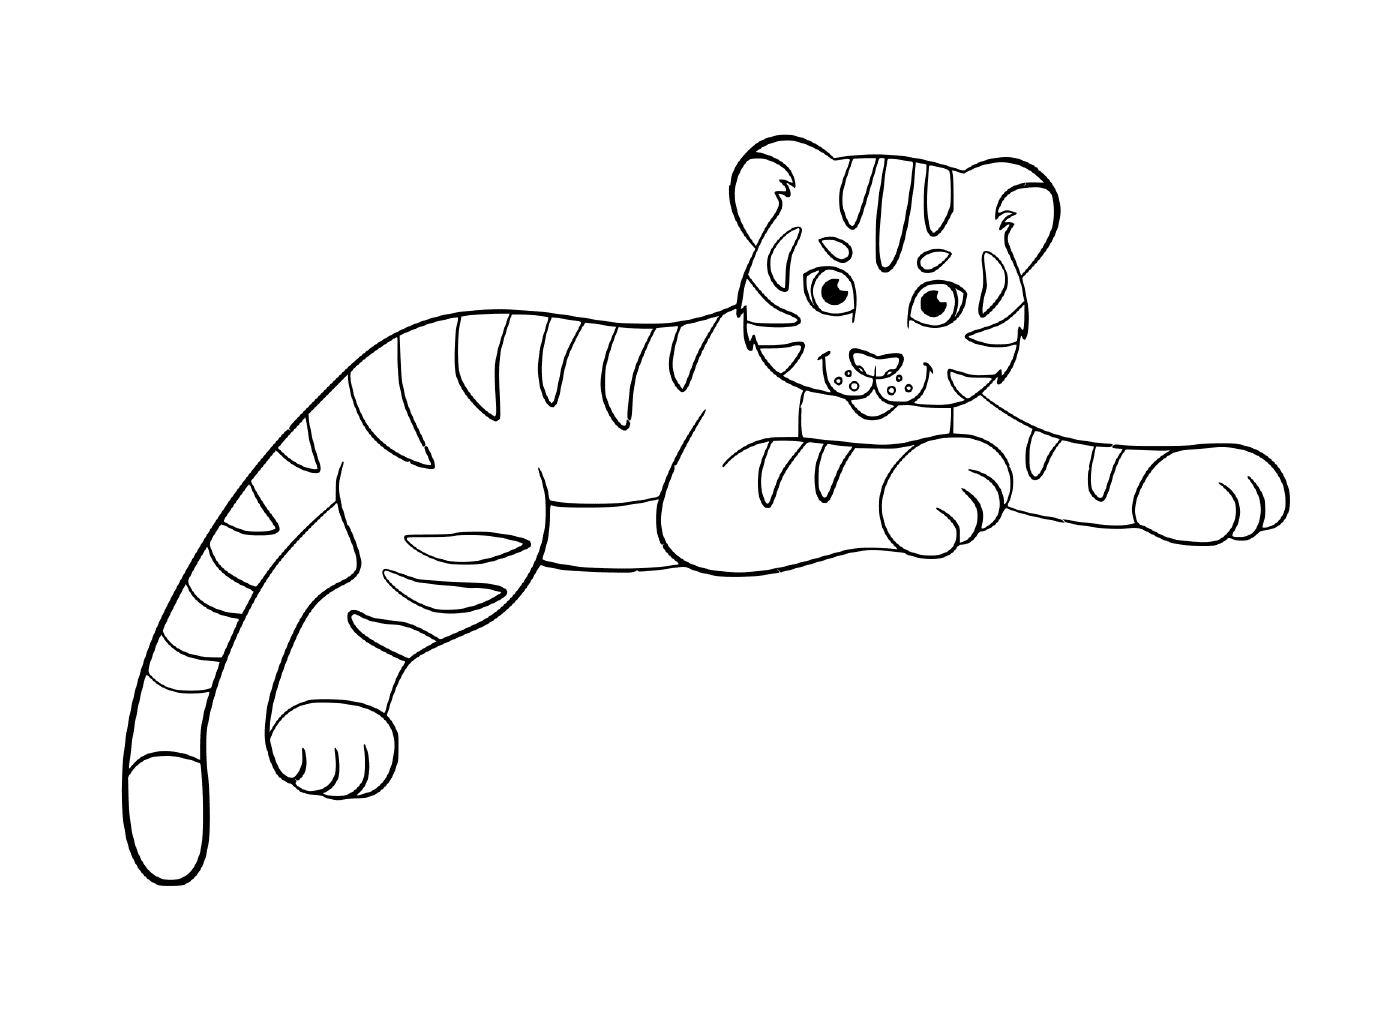  A cute kid's tiger baby 